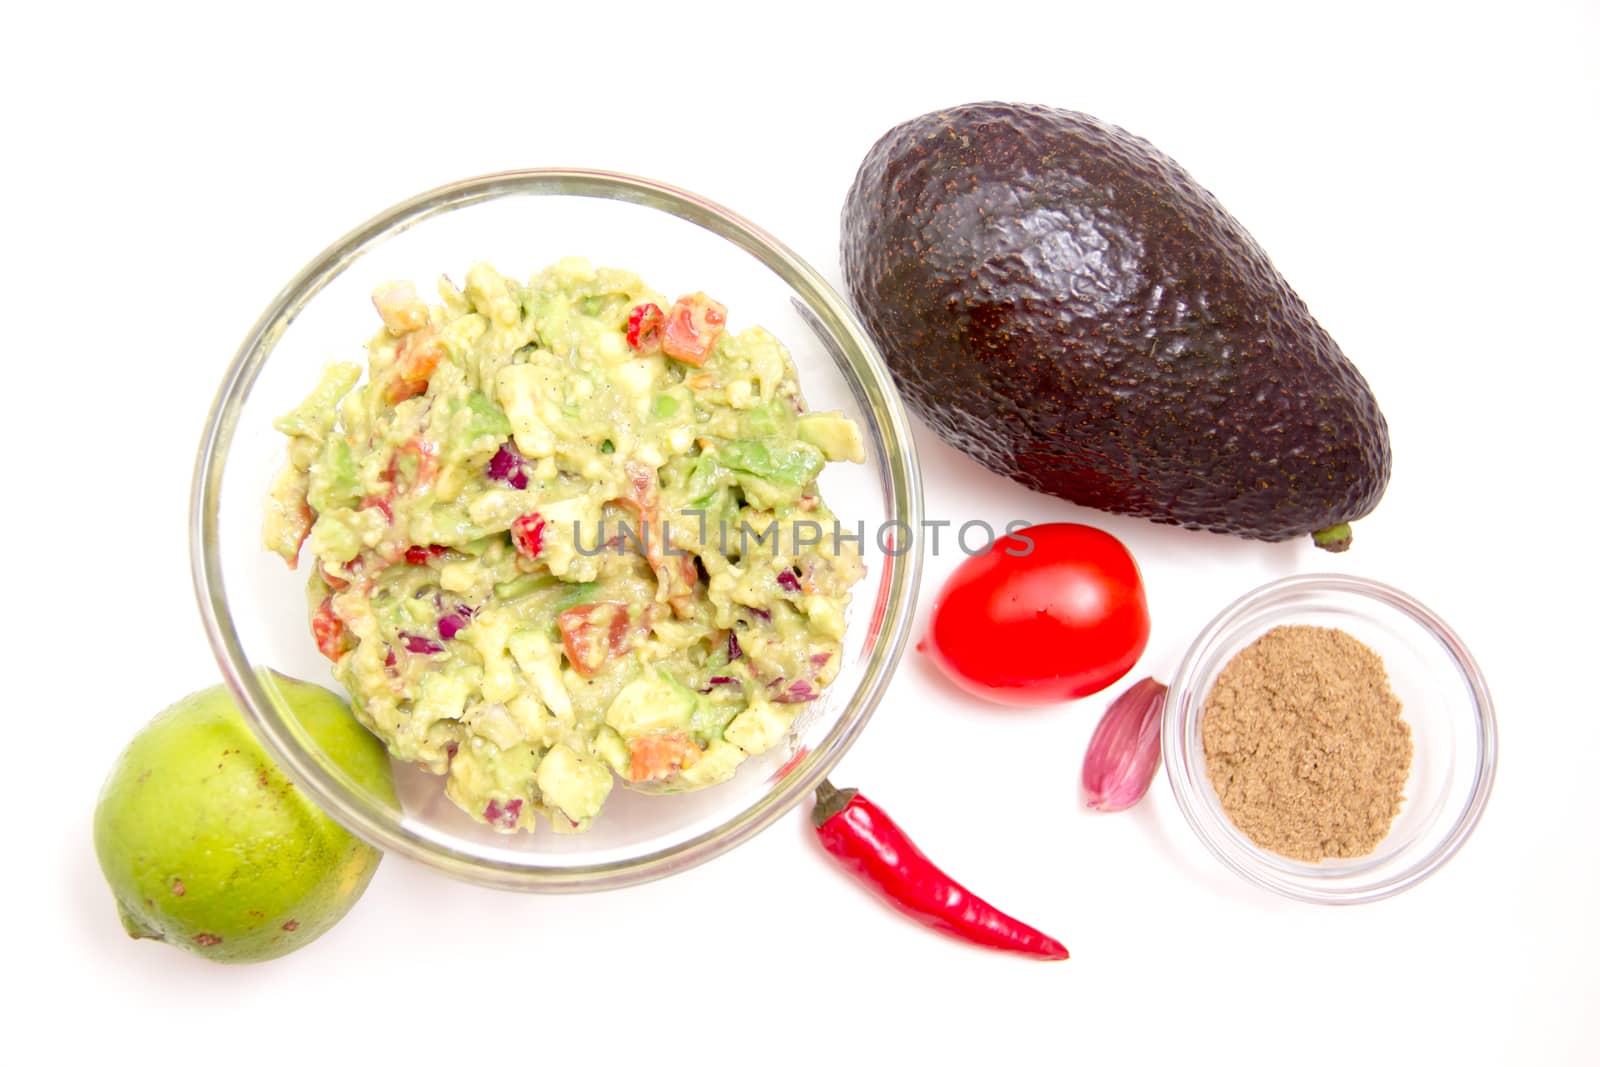 Guacamole and ingredients on white background seen from above